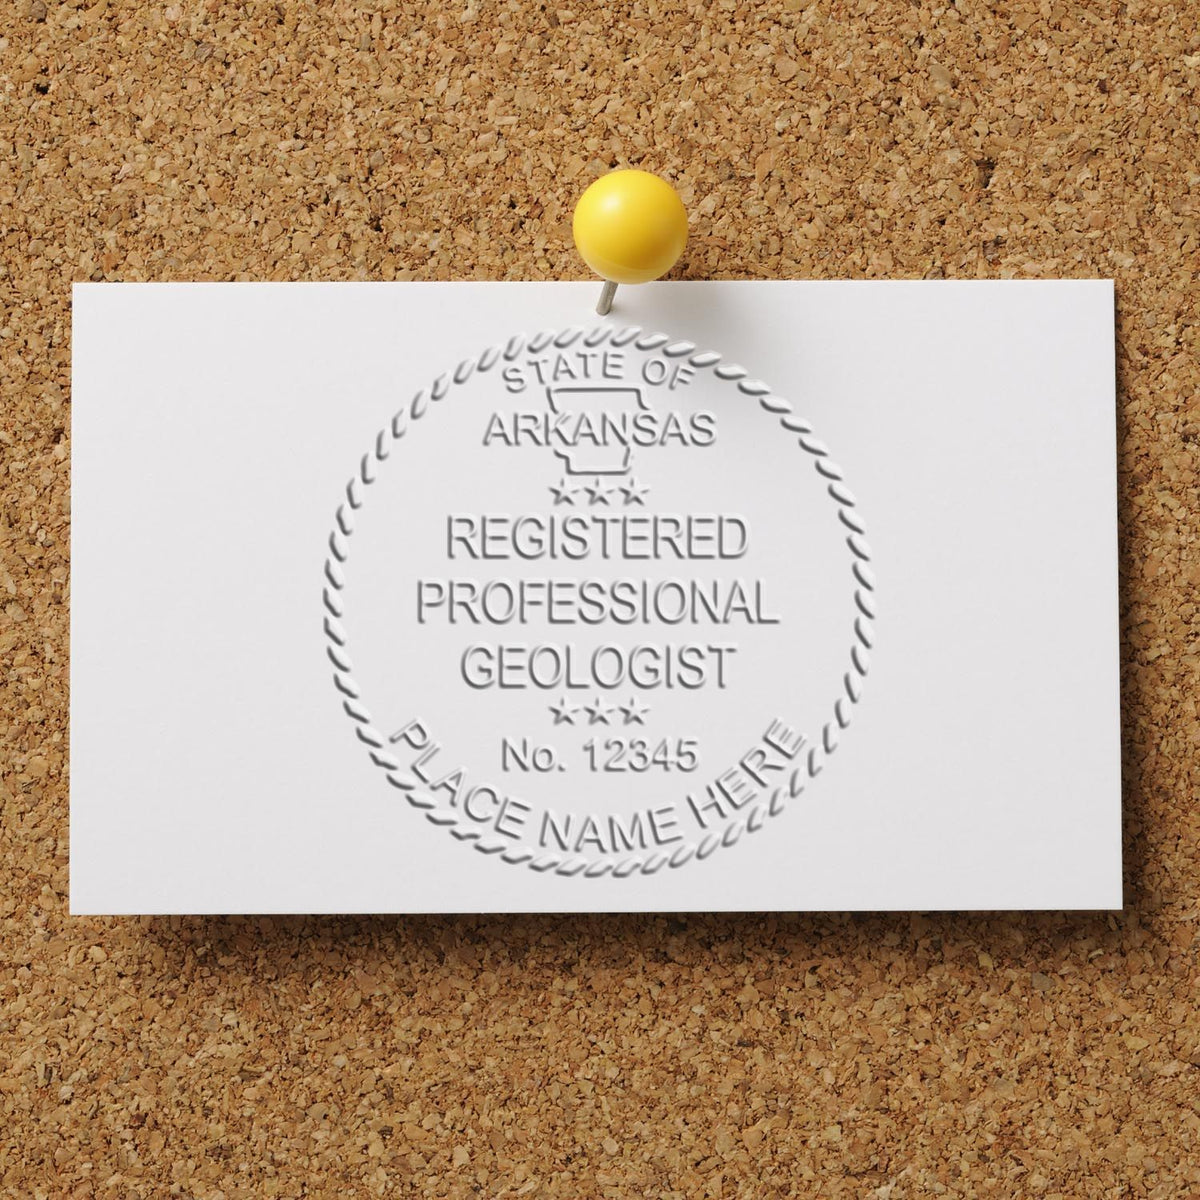 An alternative view of the Soft Arkansas Professional Geologist Seal stamped on a sheet of paper showing the image in use